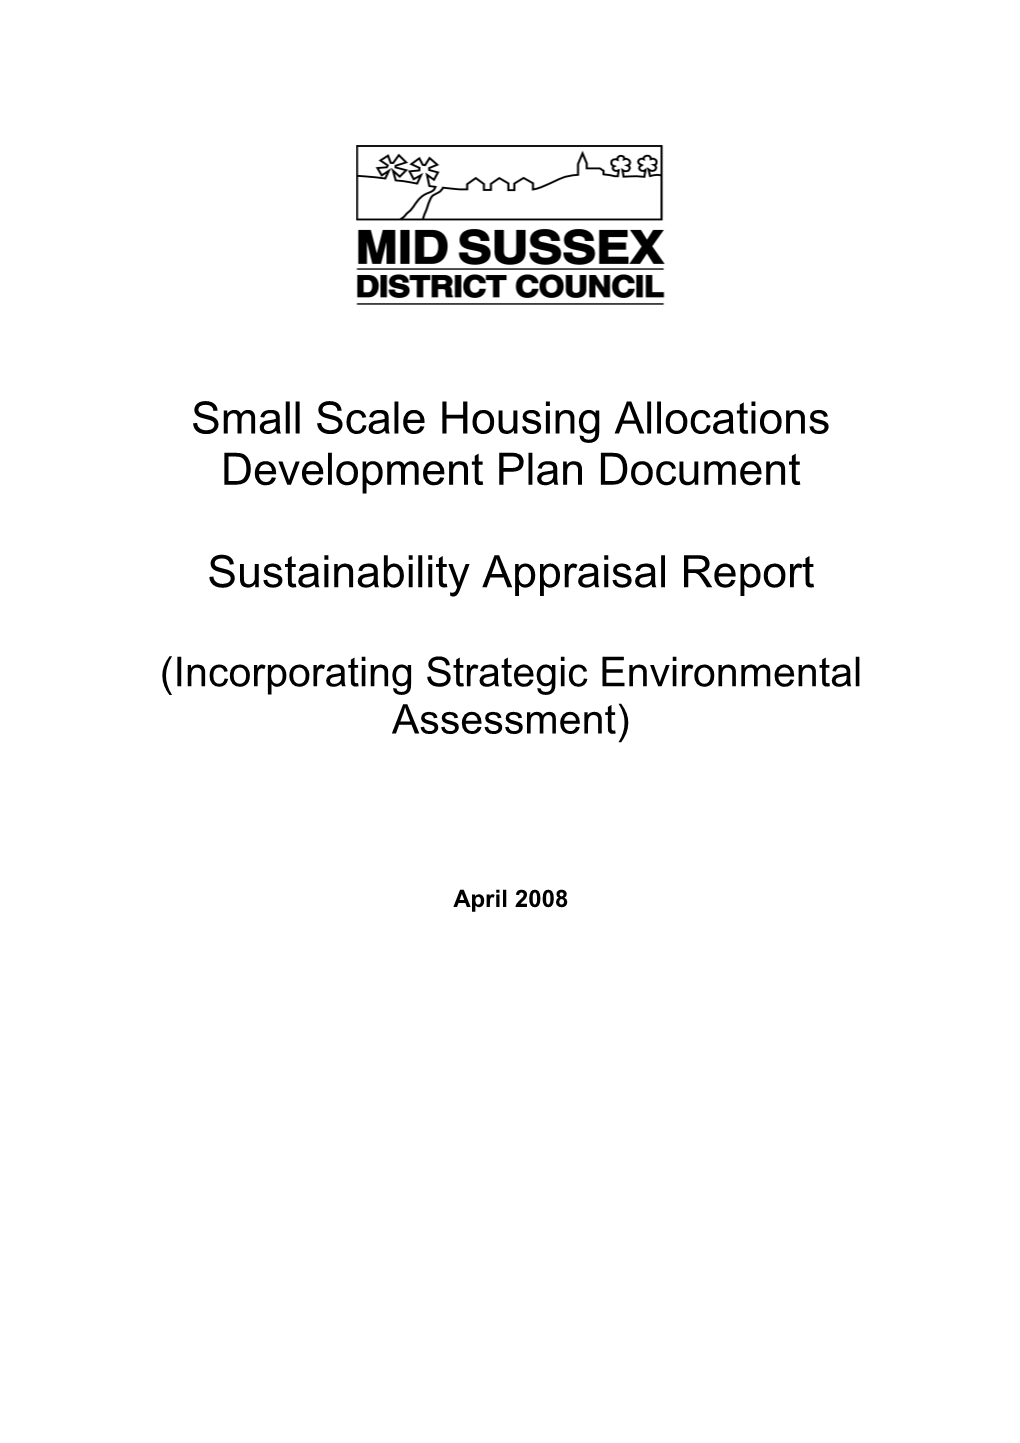 Small Scale Housing Allocations Sustainability Appraisal Report